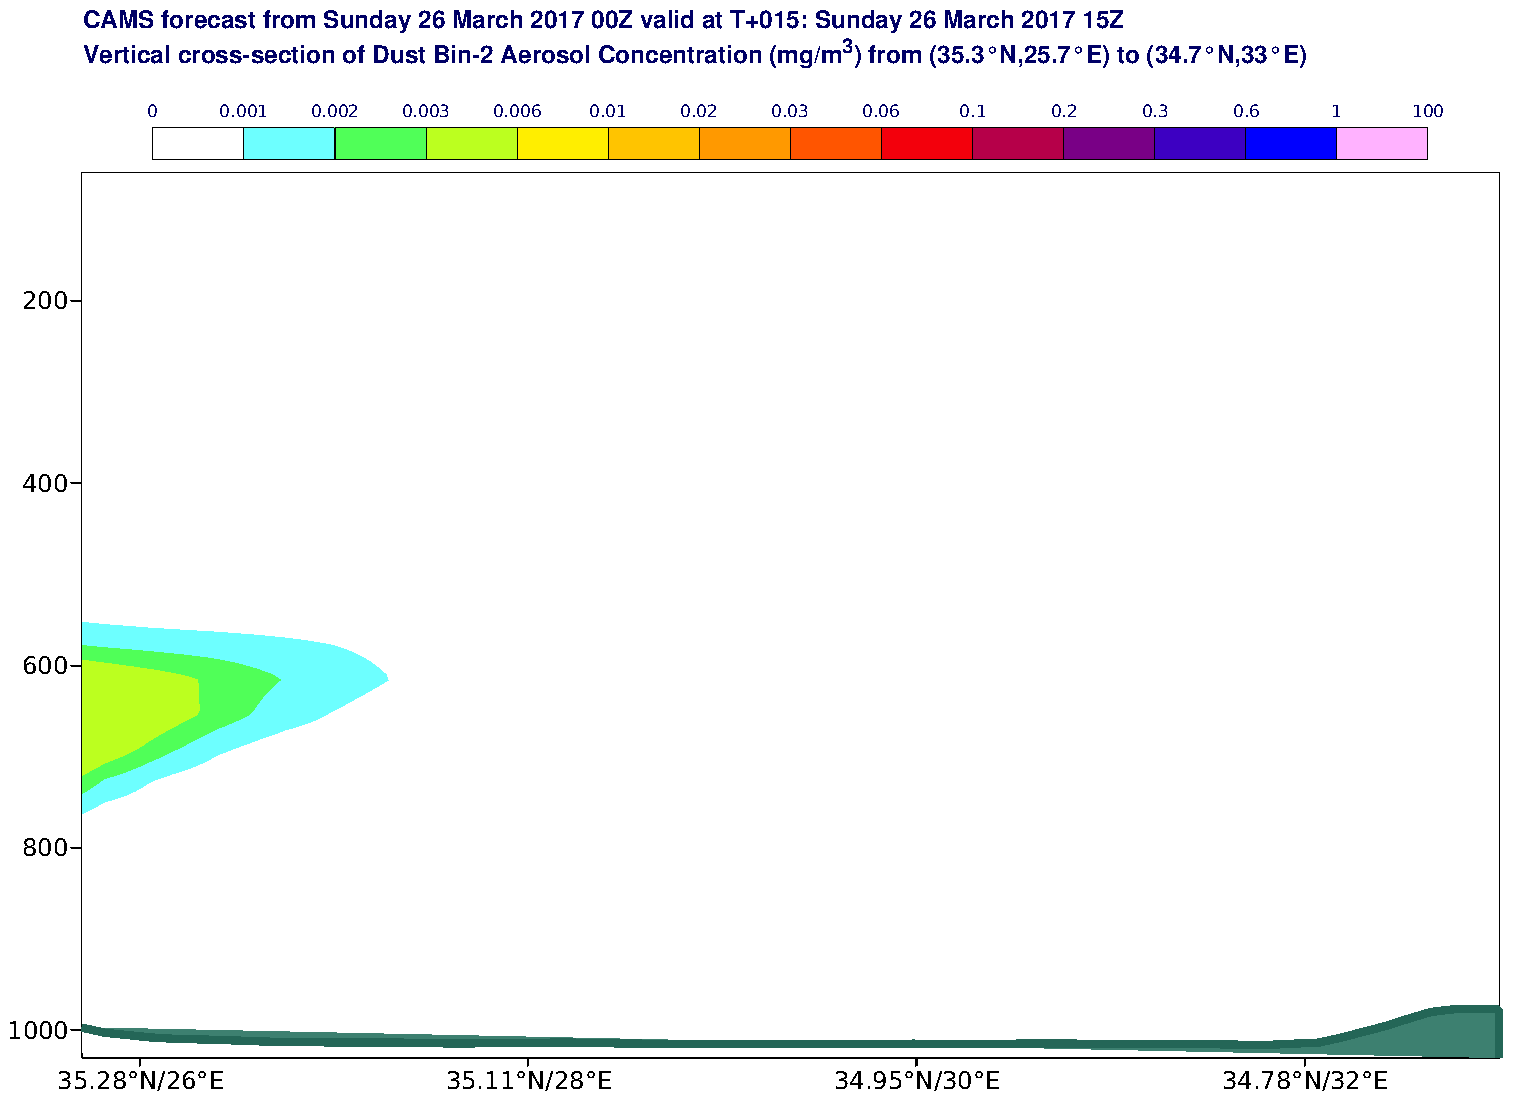 Vertical cross-section of Dust Bin-2 Aerosol Concentration (mg/m3) valid at T15 - 2017-03-26 15:00